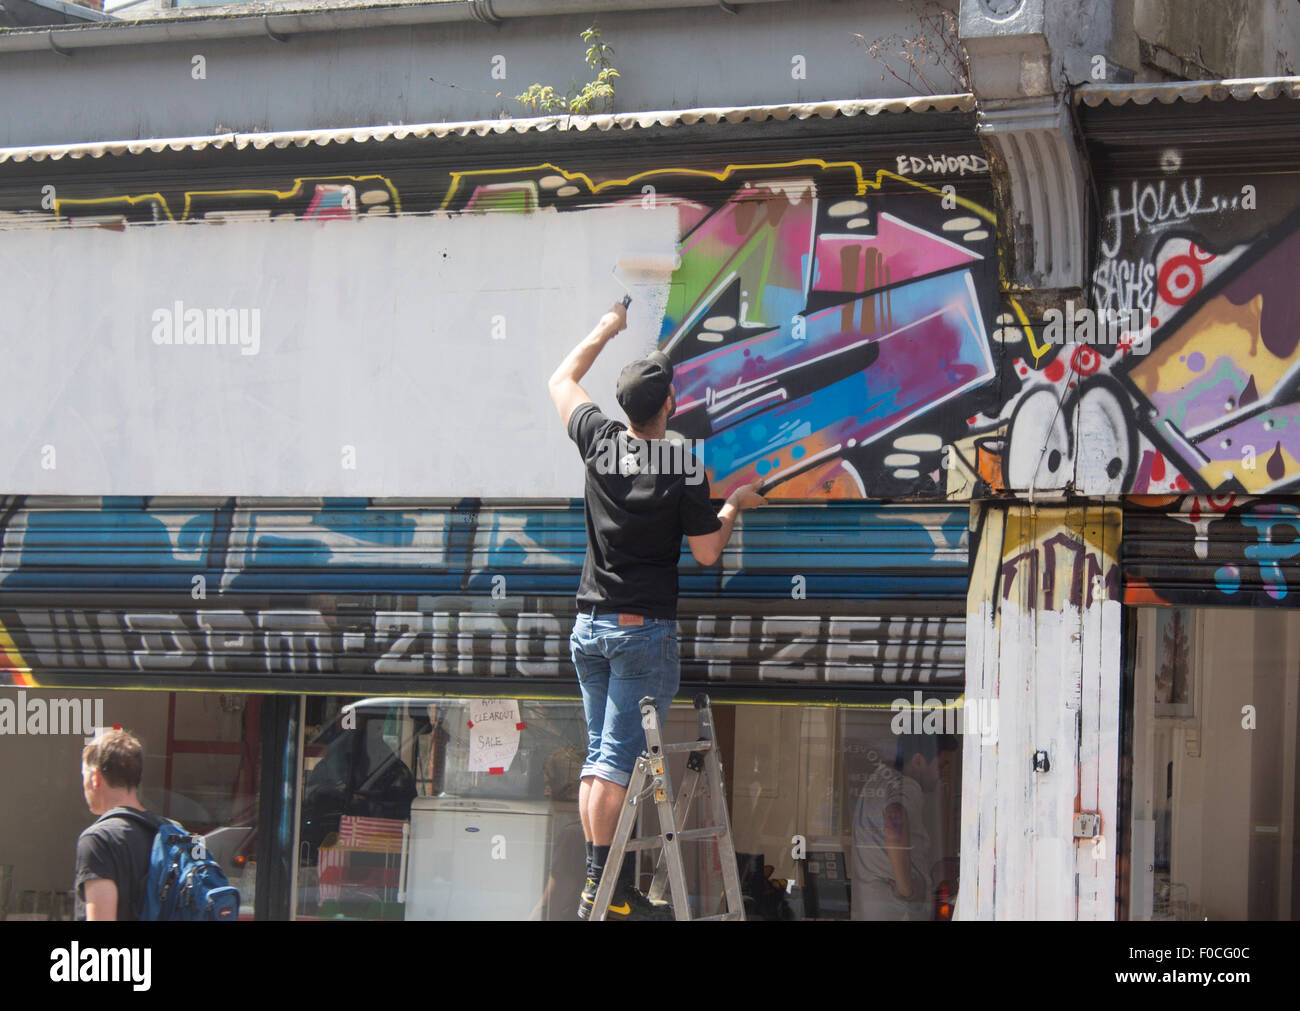 Man painting over removing graffiti with roller and white paint Brixton London England UK Stock Photo